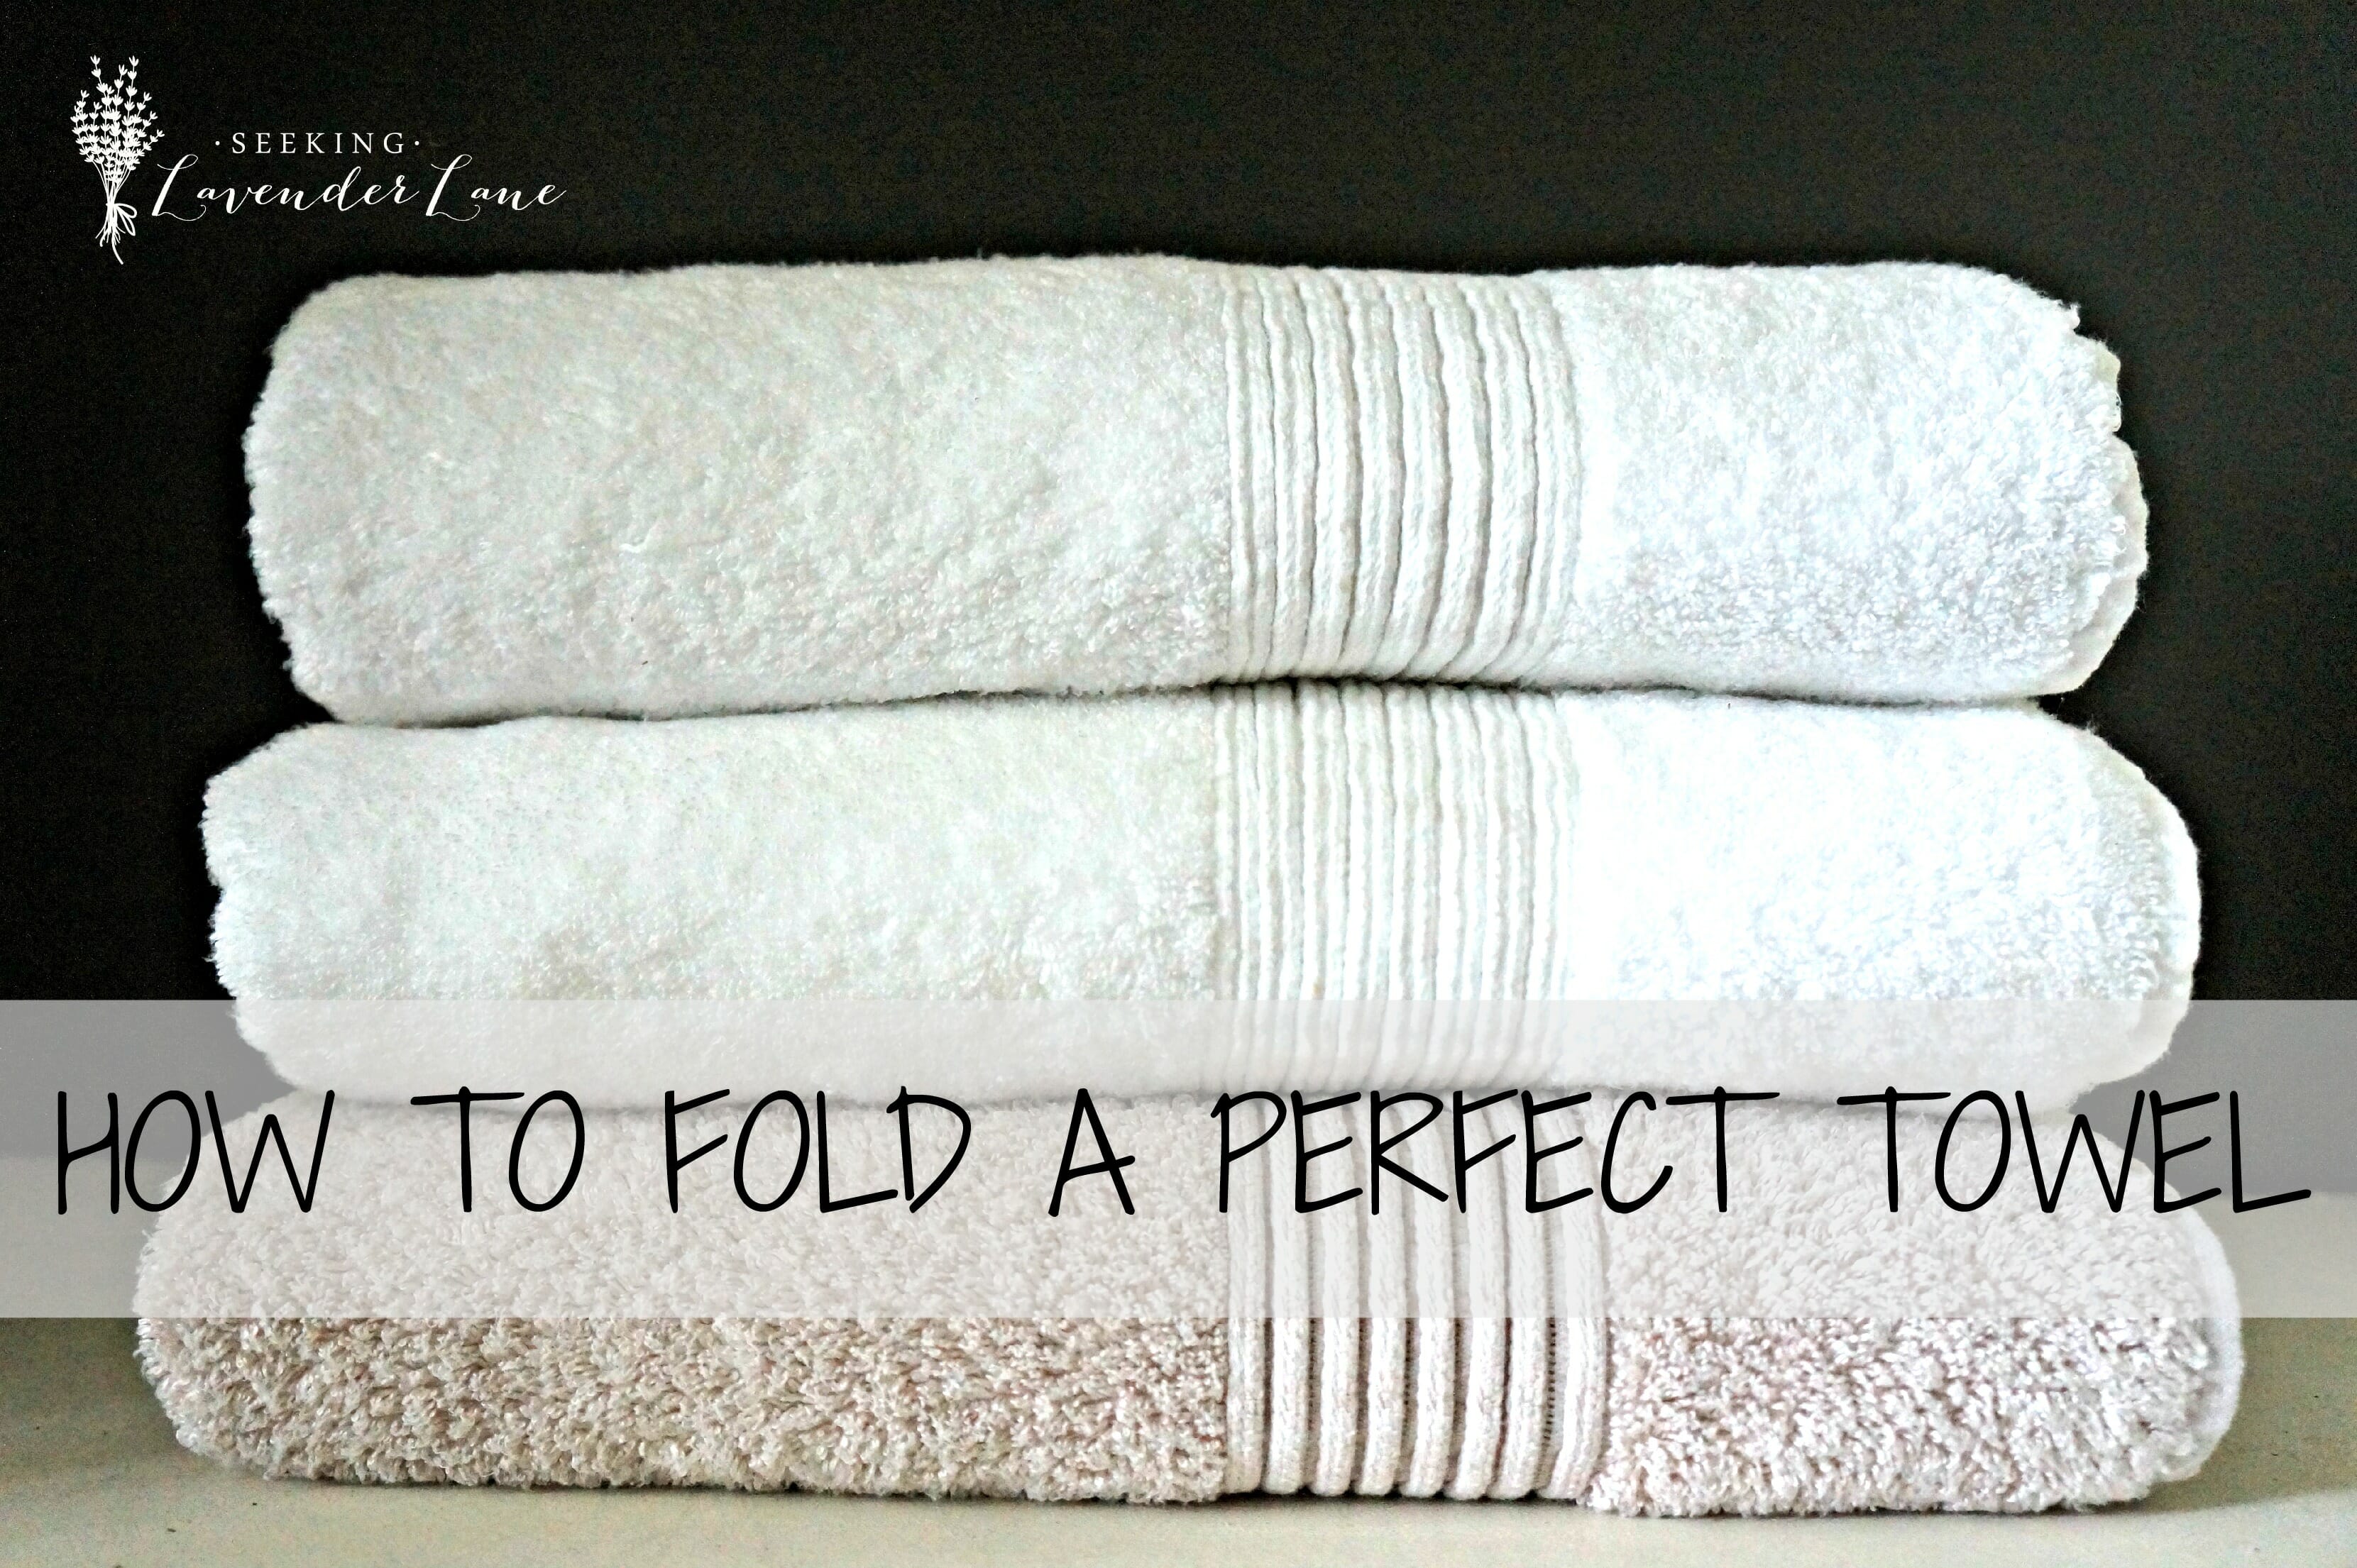 How to Fold a Perfect Towel